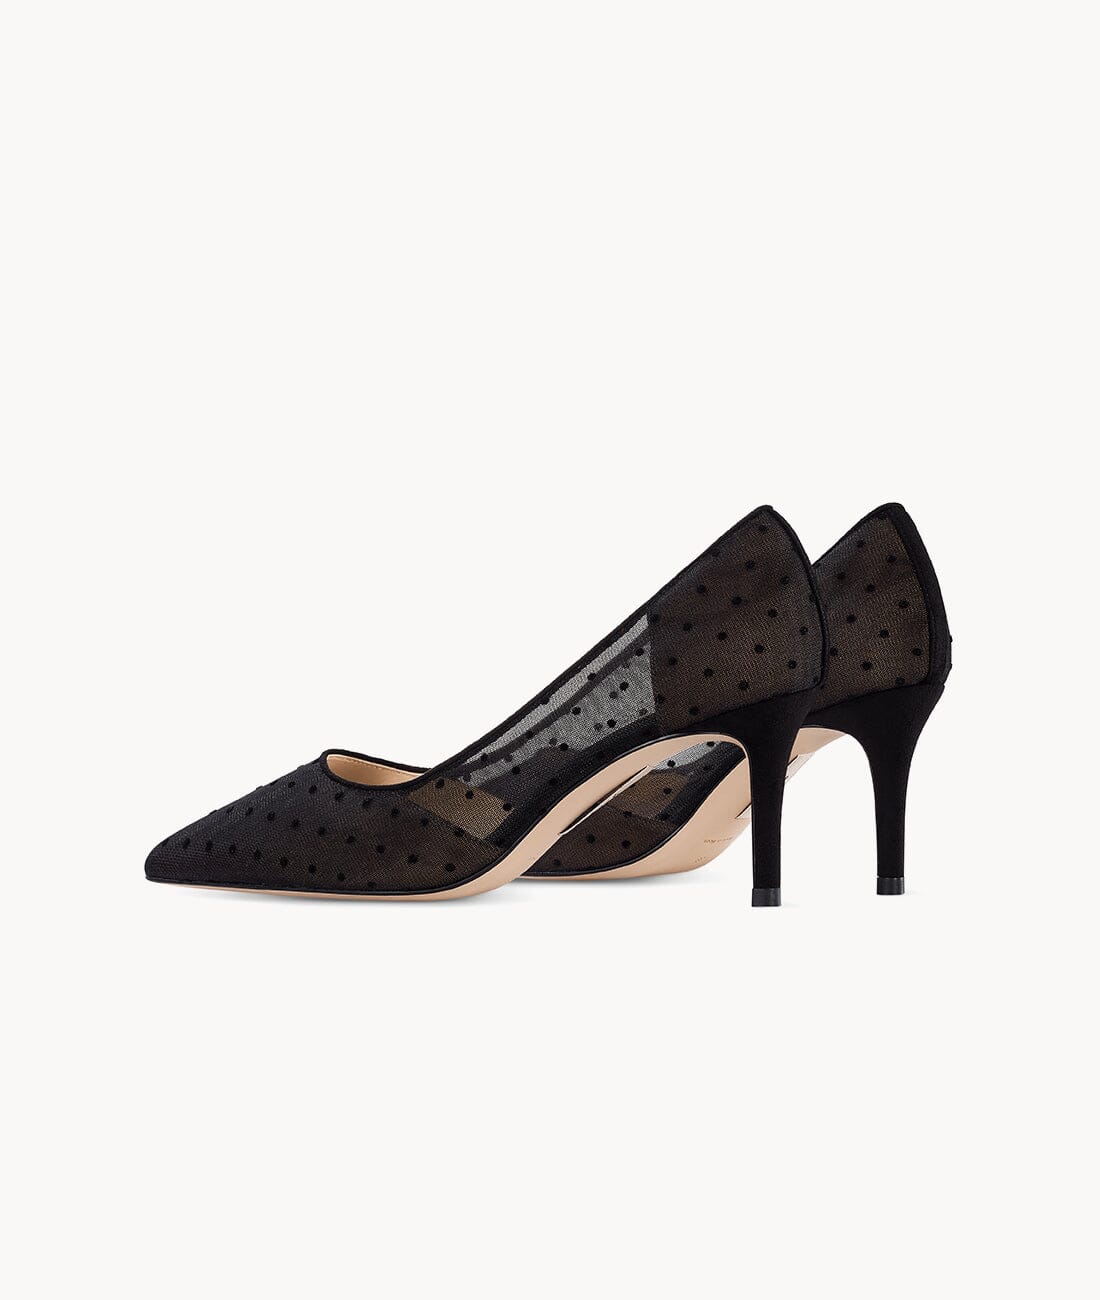 7or9 - Rose Anonyme - Pumps